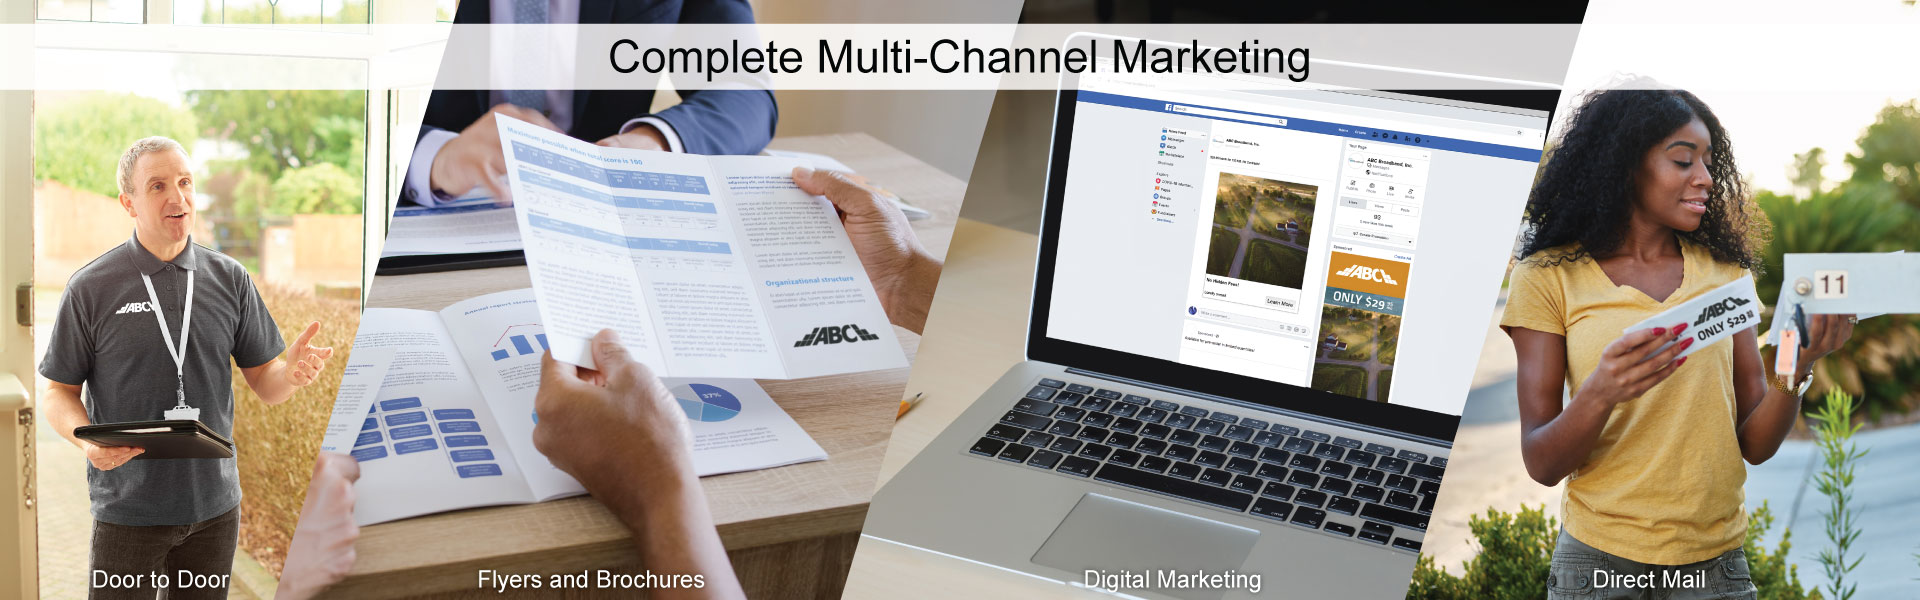 Multi-Channel Marketing for All Business Categories